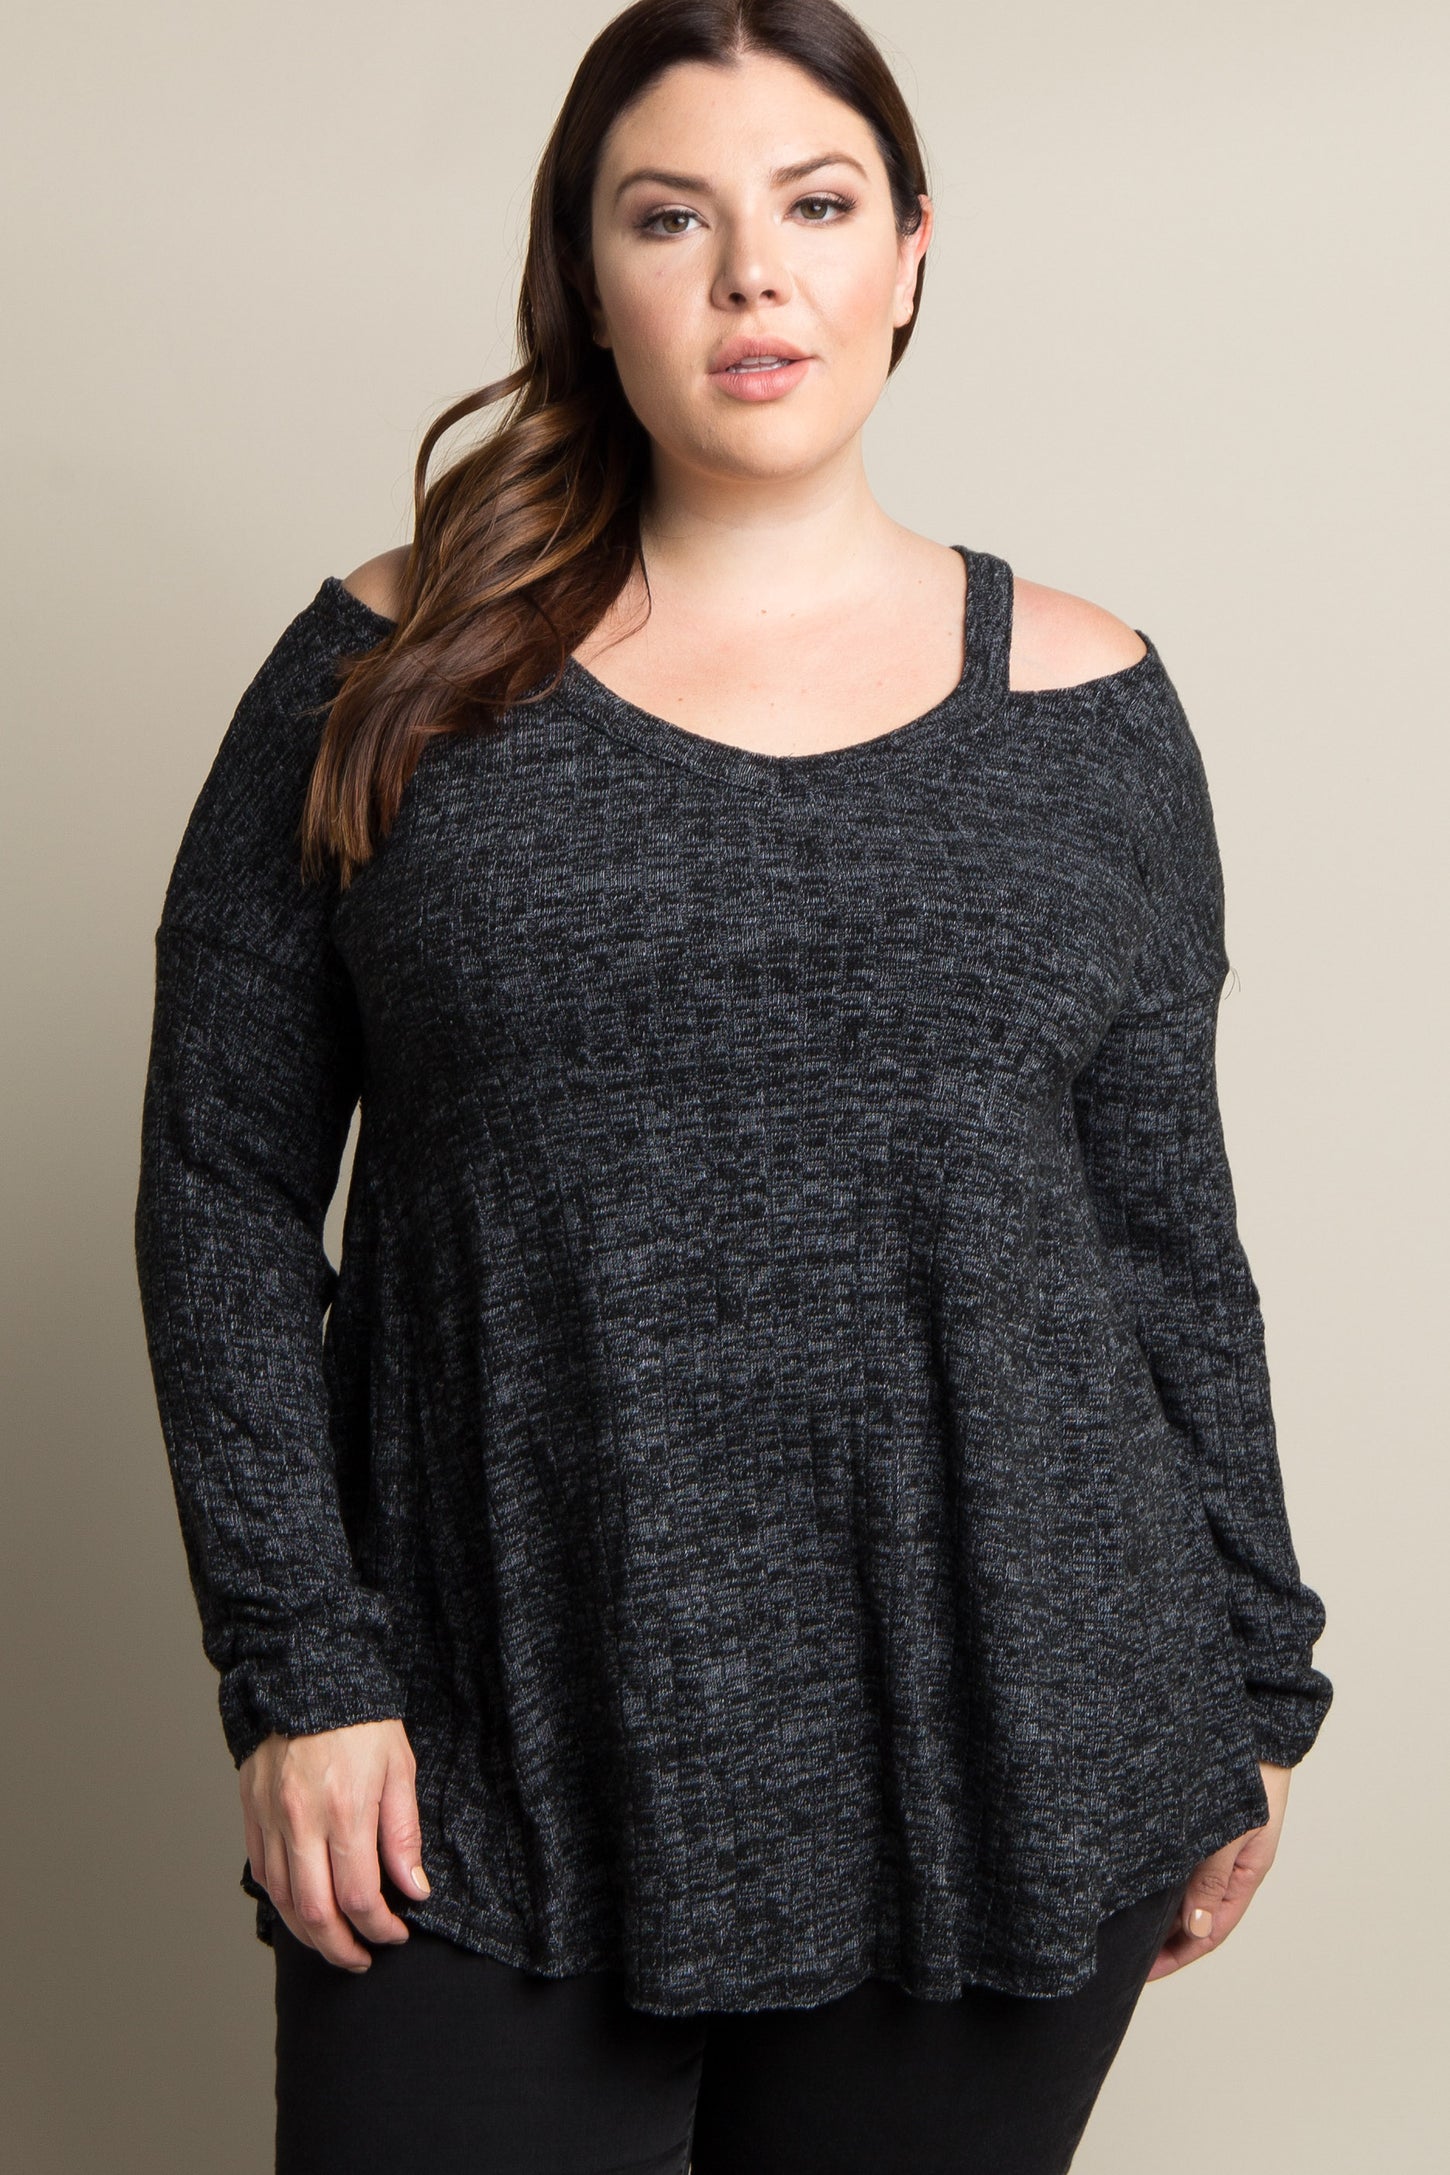 Charcoal Grey Cold Shoulder Knit Plus Maternity Top